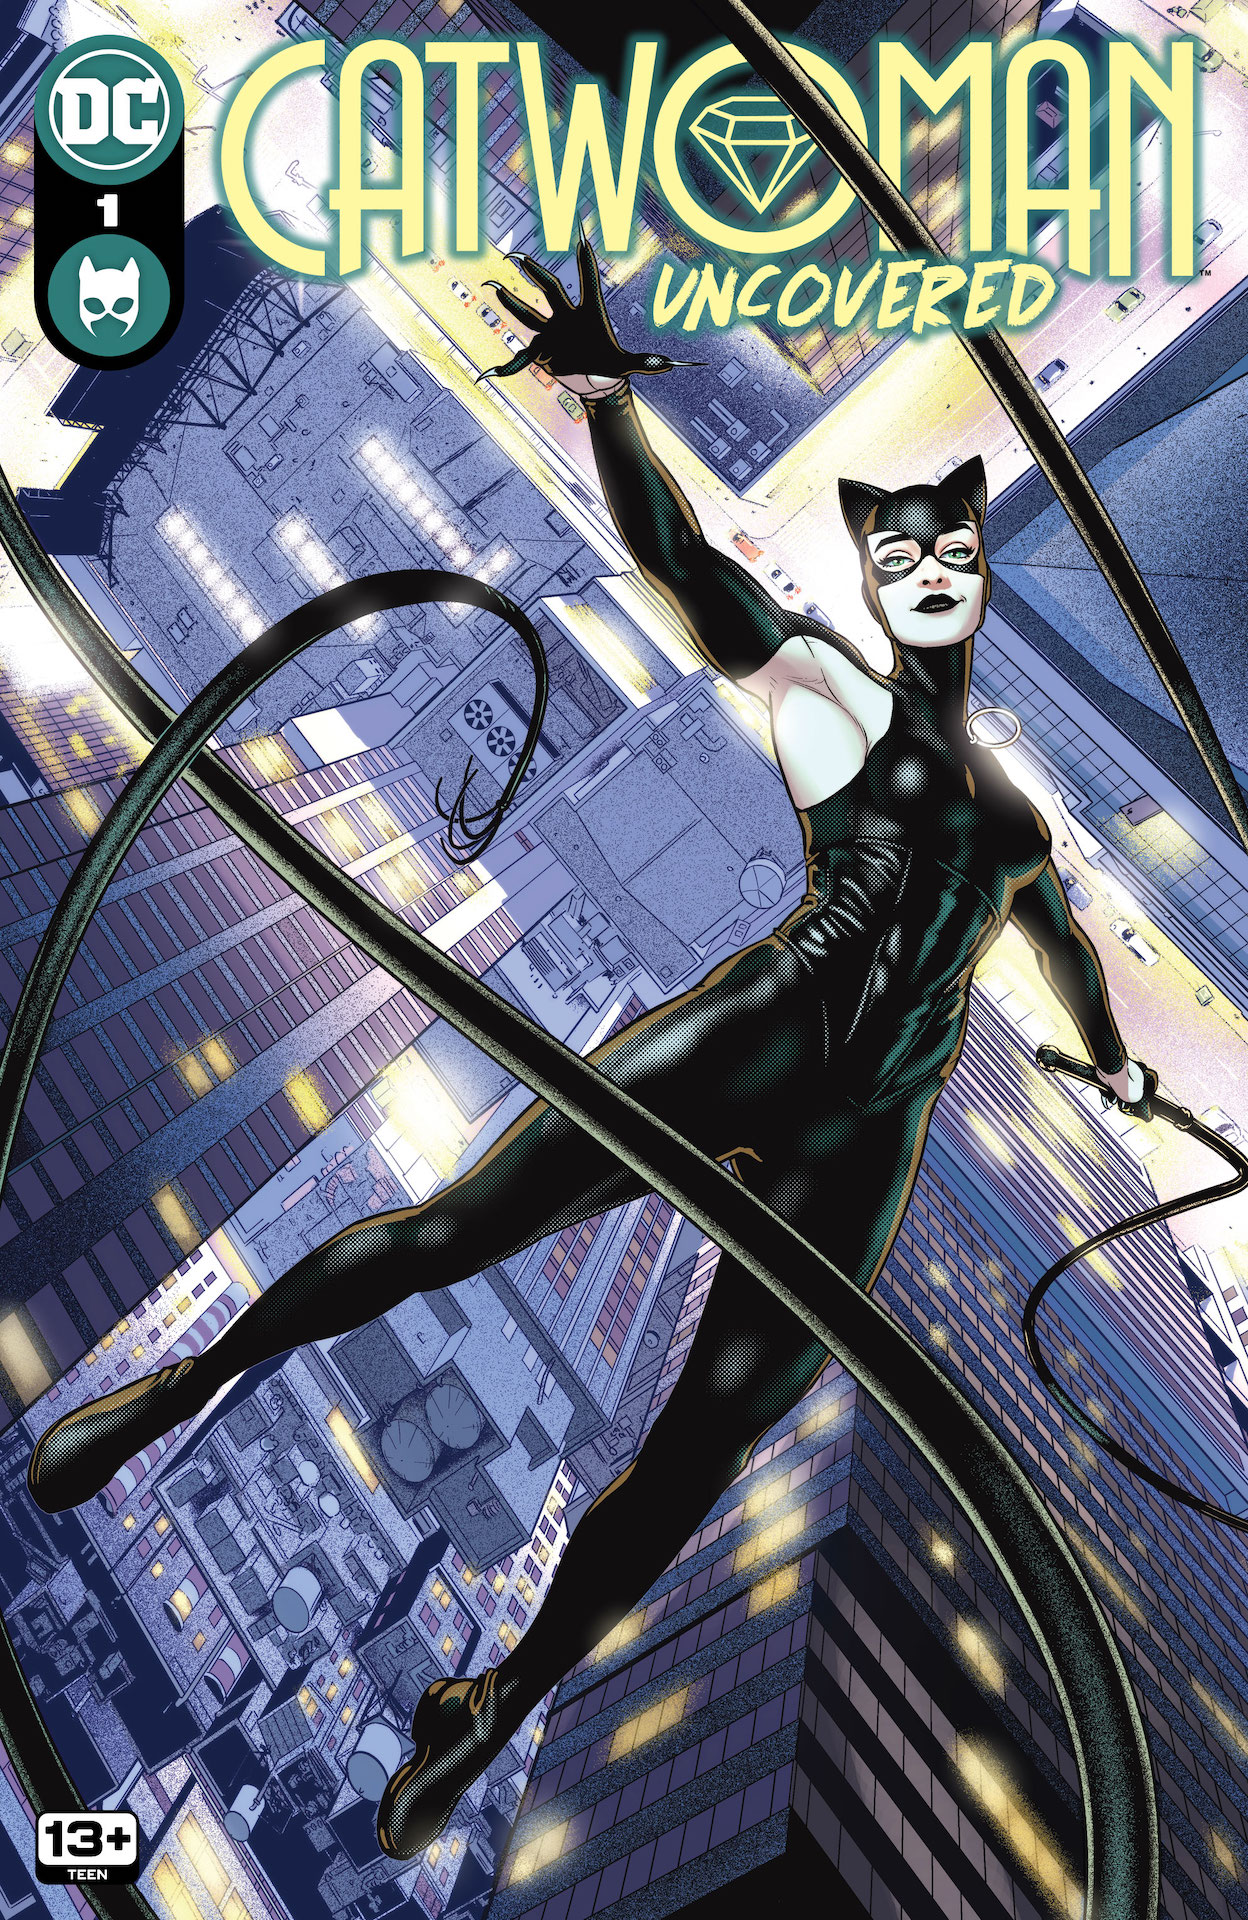 DC Preview: Catwoman: Uncovered #1